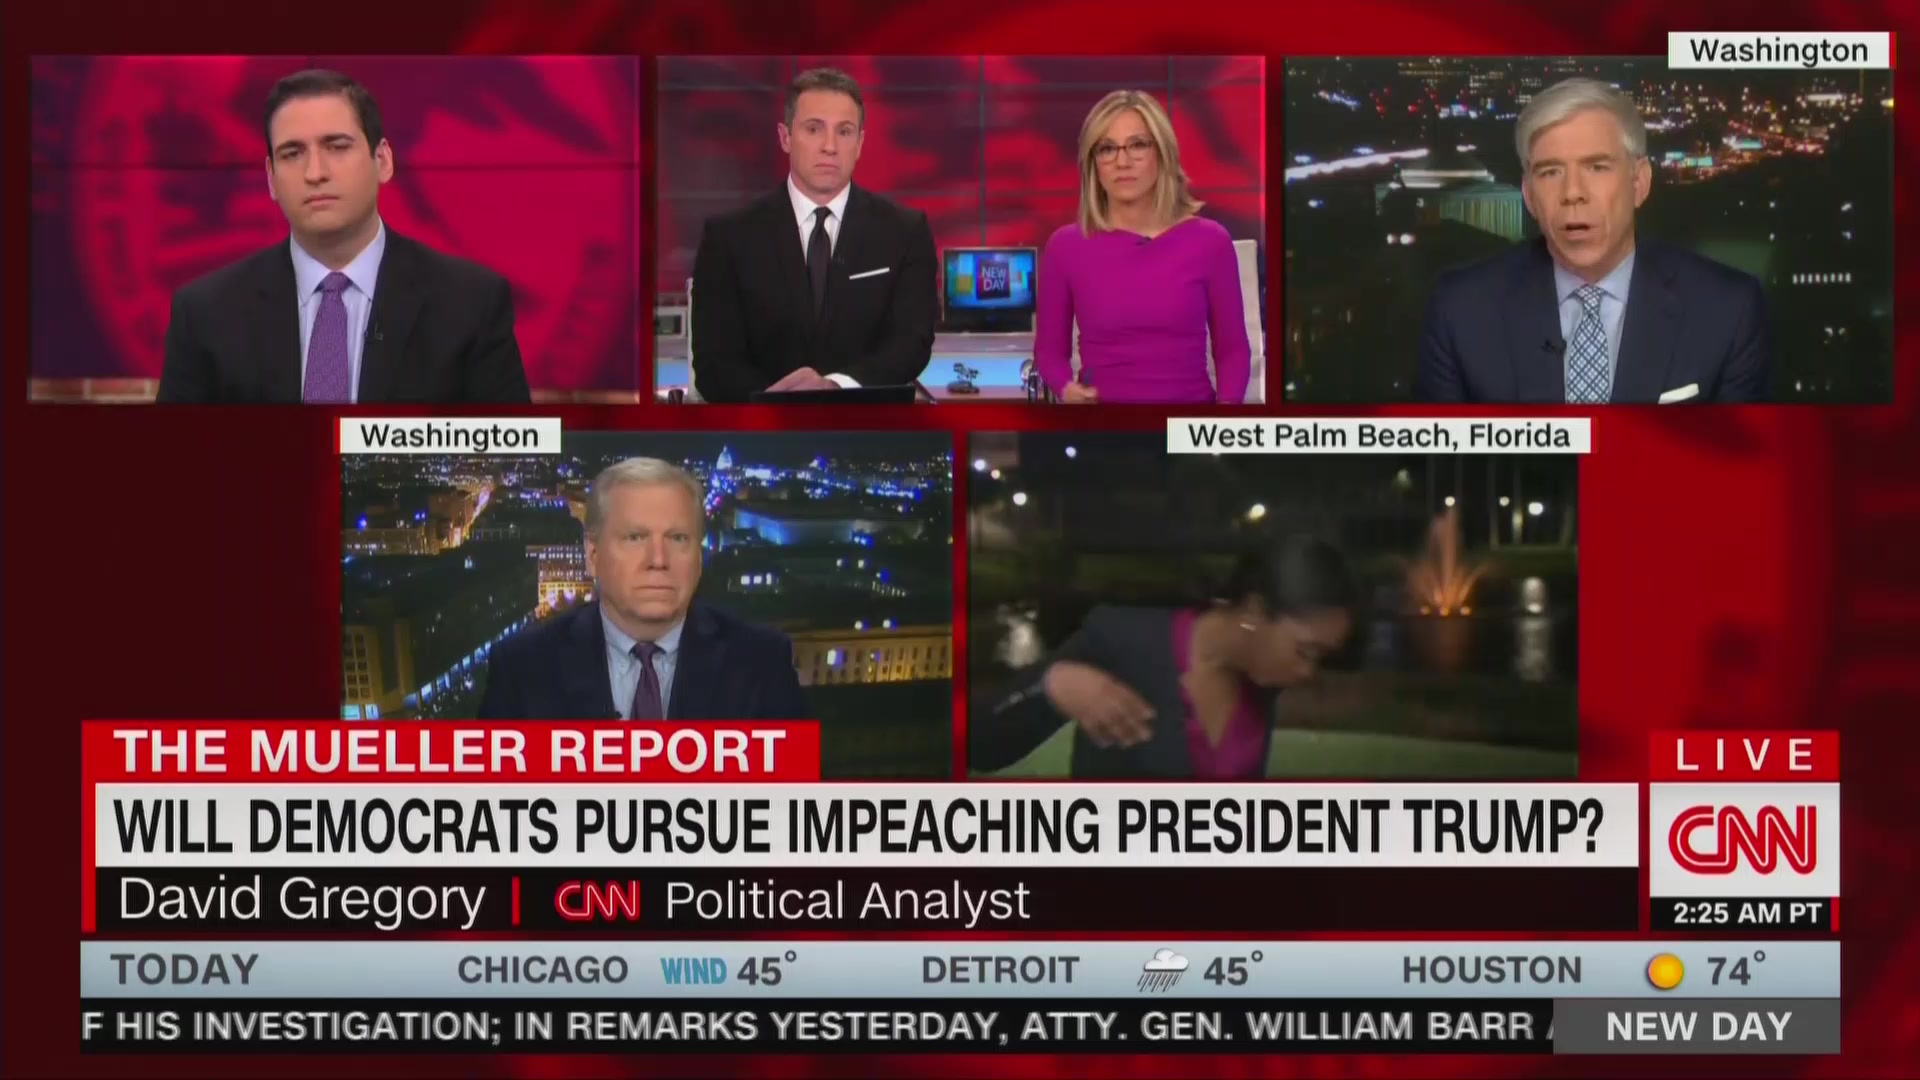 WATCH: CNN’s Abby Phillip Flips Out During Live TV Report When Lizard Crawls On Her